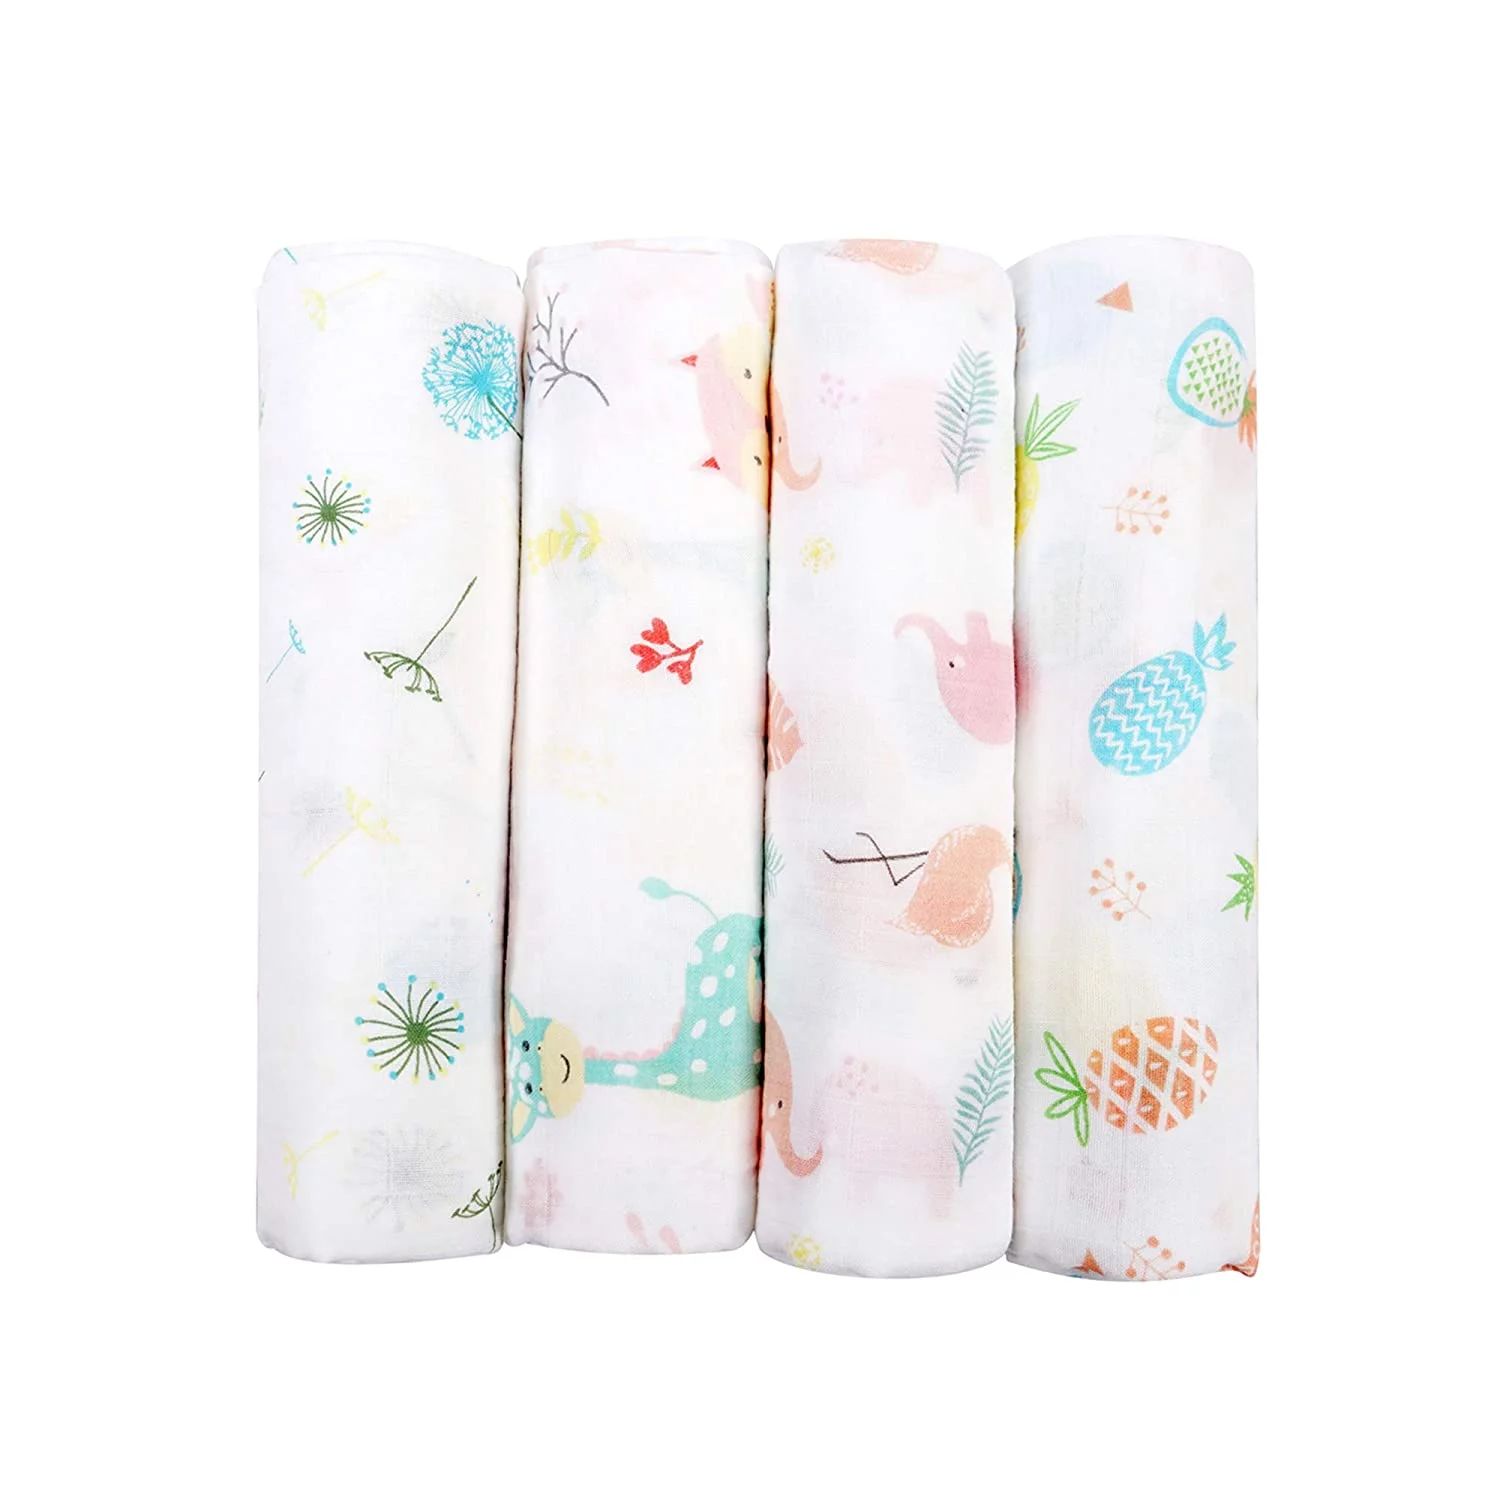 Viviland 4 Pack Muslin Baby Swaddle Blankets Bamboo Cotton Receiving Blankets 47" x 47" | Walmart (US)